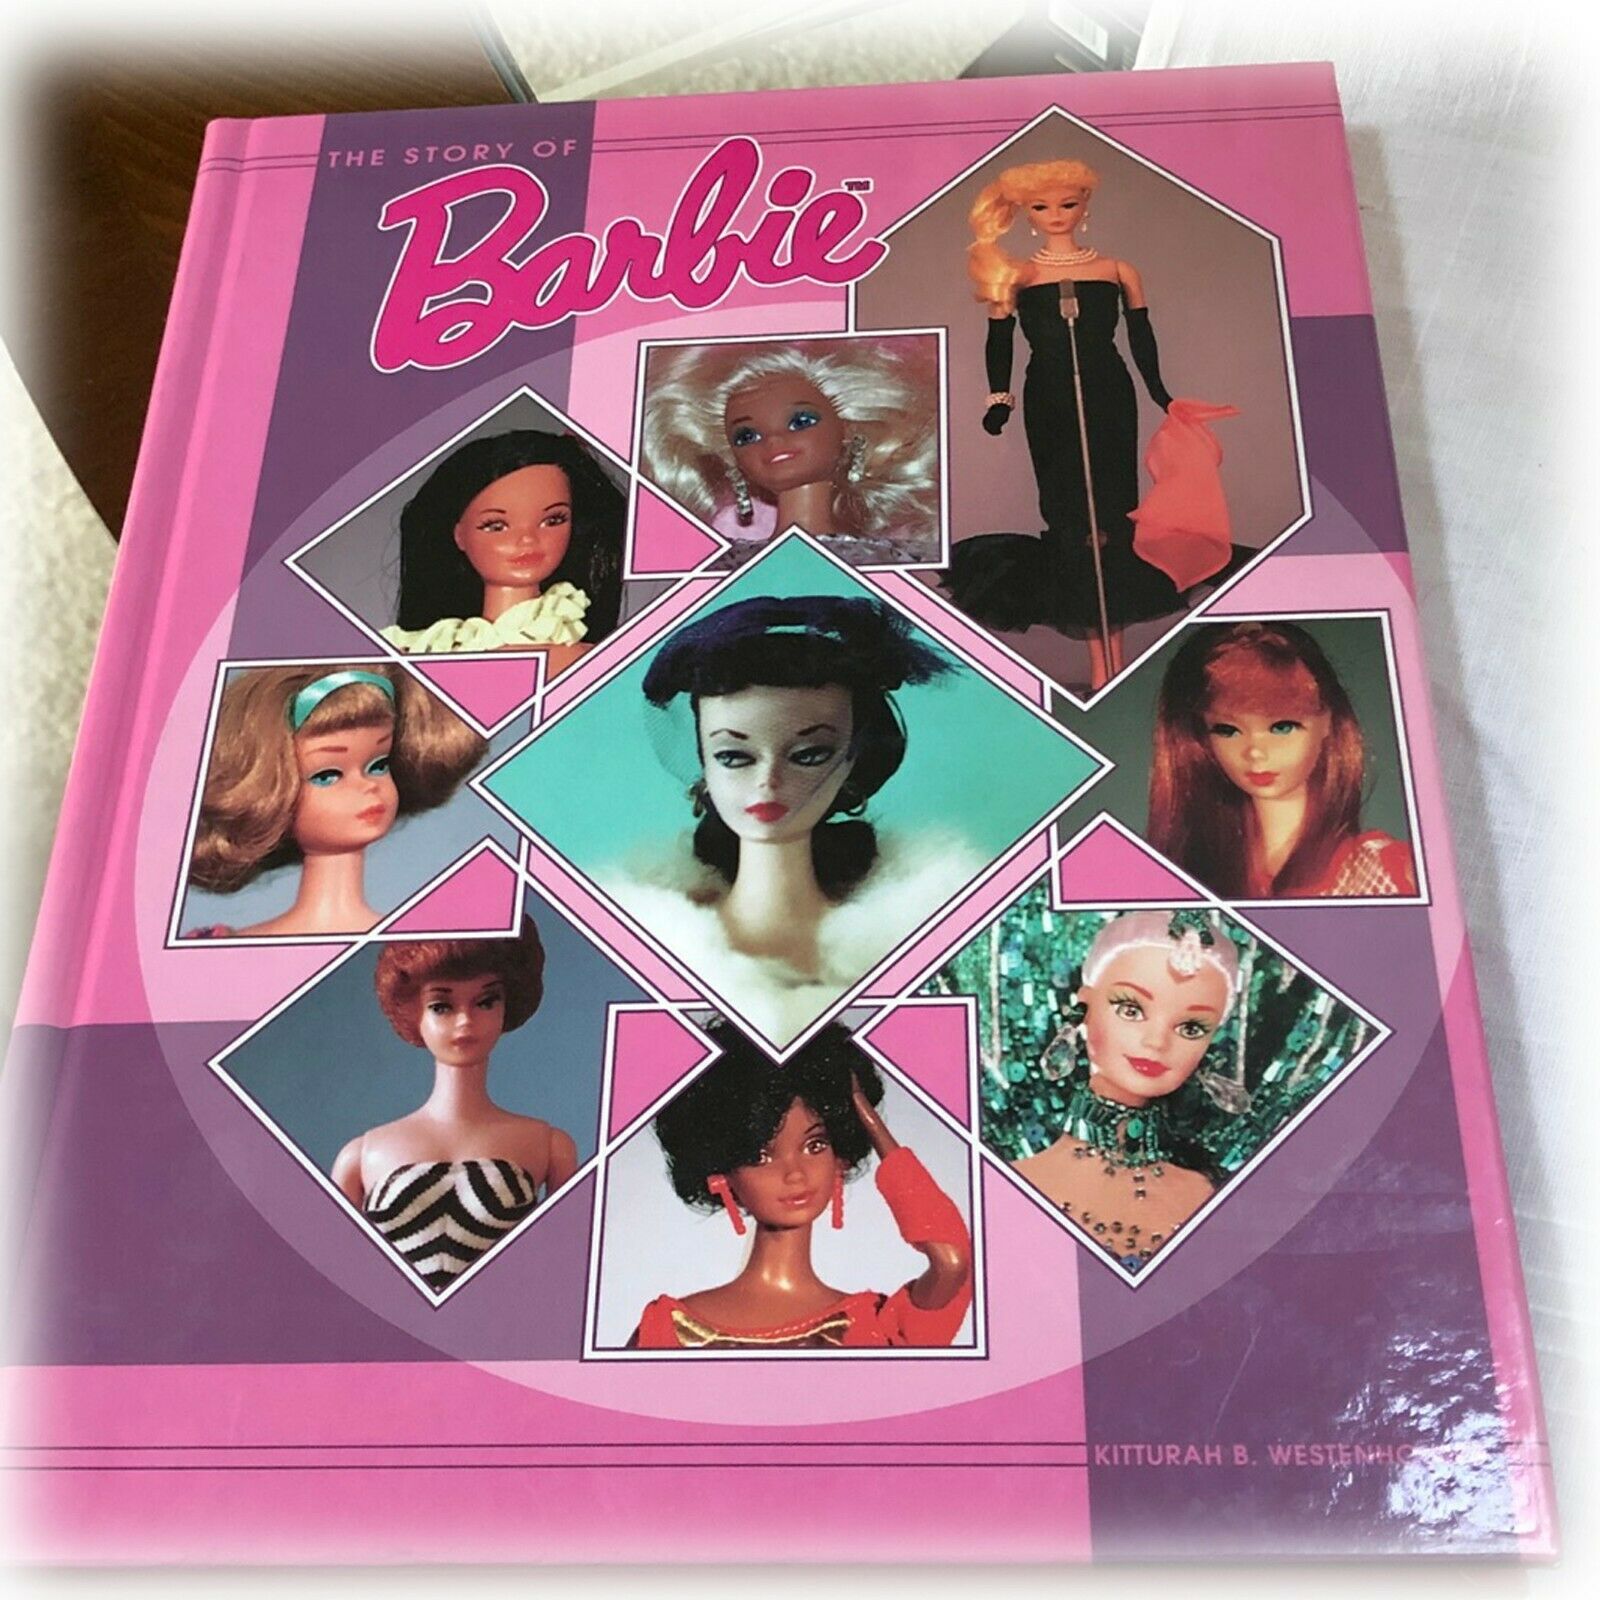 The Story Of Barbie - A Collectors' Guide And Reference, Kitturah B Westenhouser